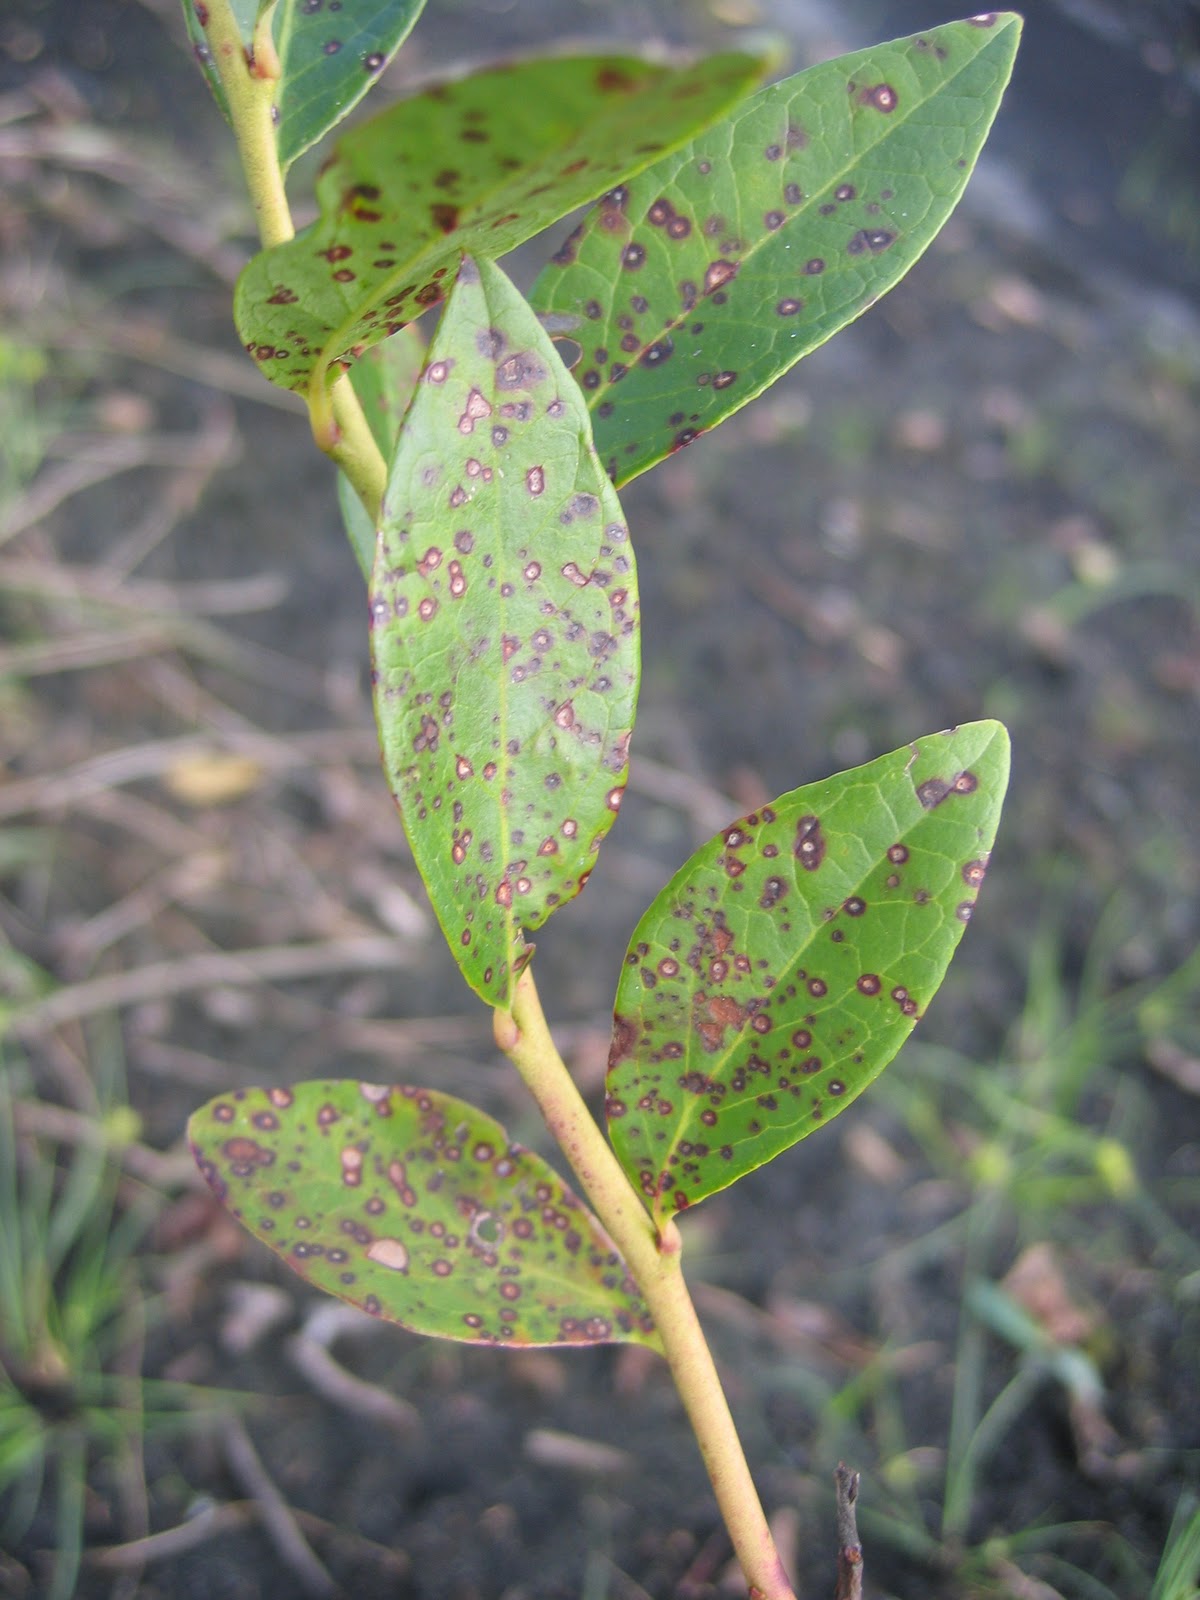 The NC Blueberry Journal: Evaluating leafspot effects